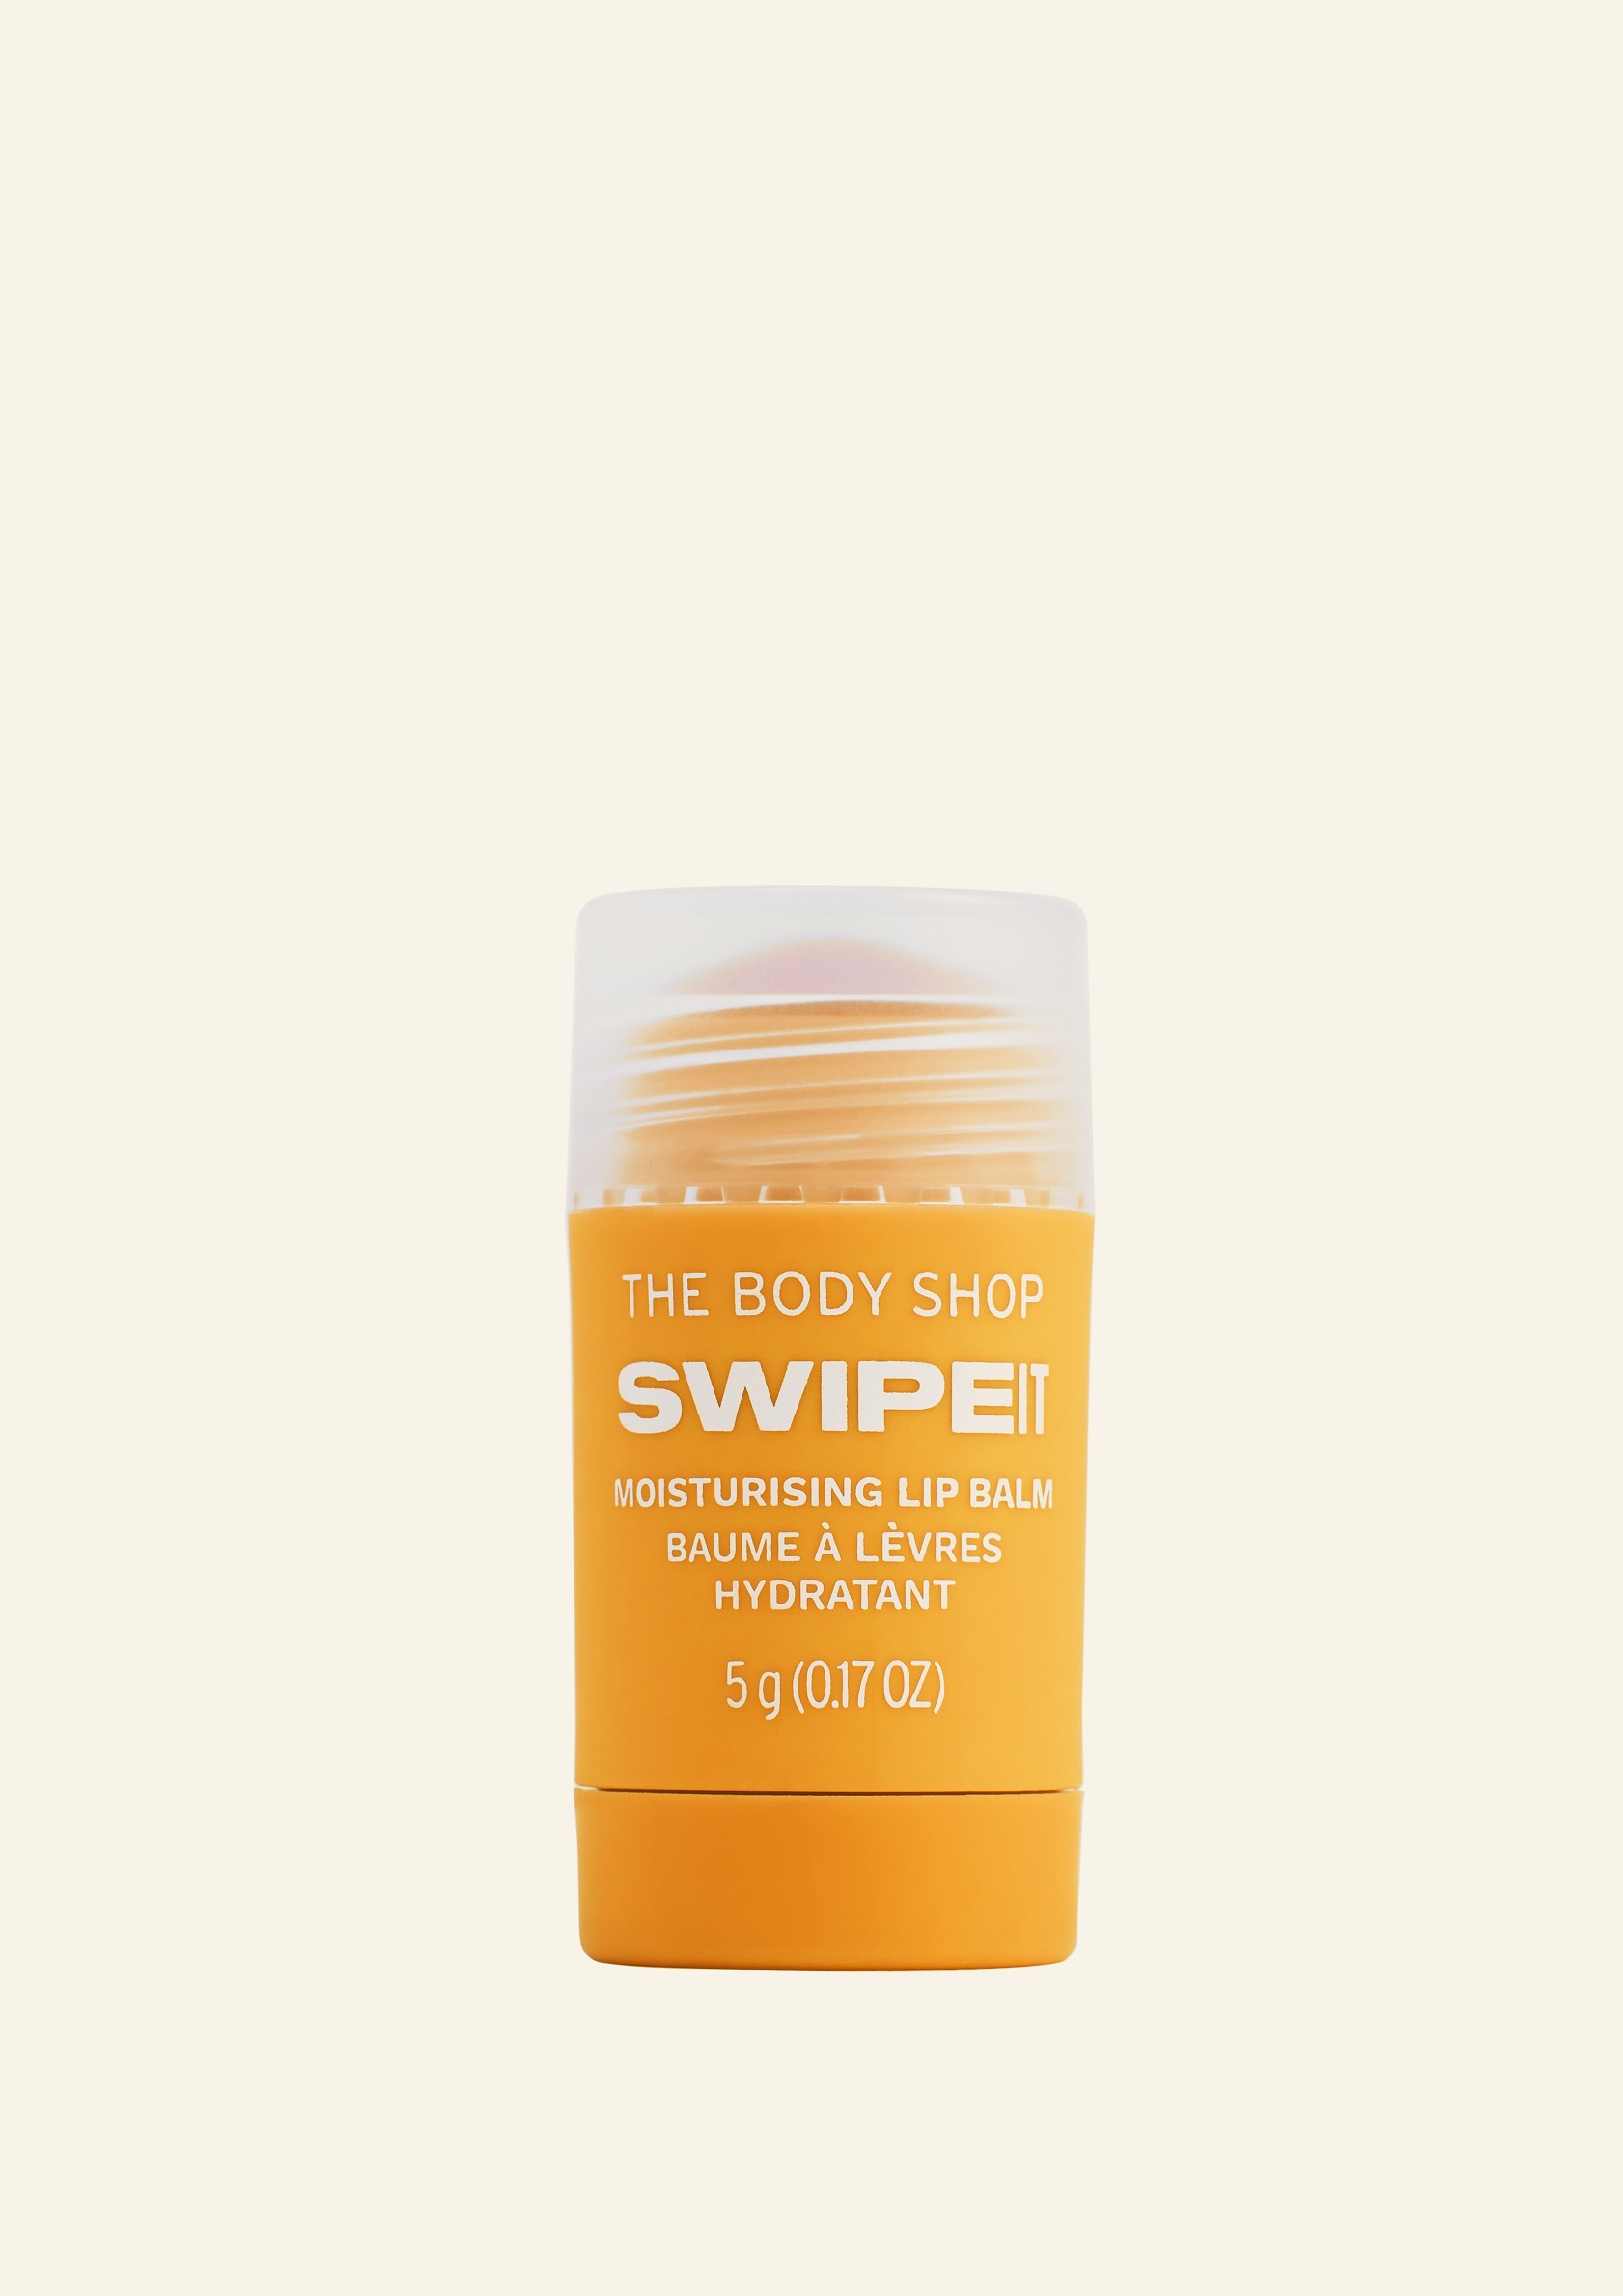 1016799 LIP BALM SWIPE IT PASSIONFRUIT 6 G A0 X BRONZE NW INADCPS187